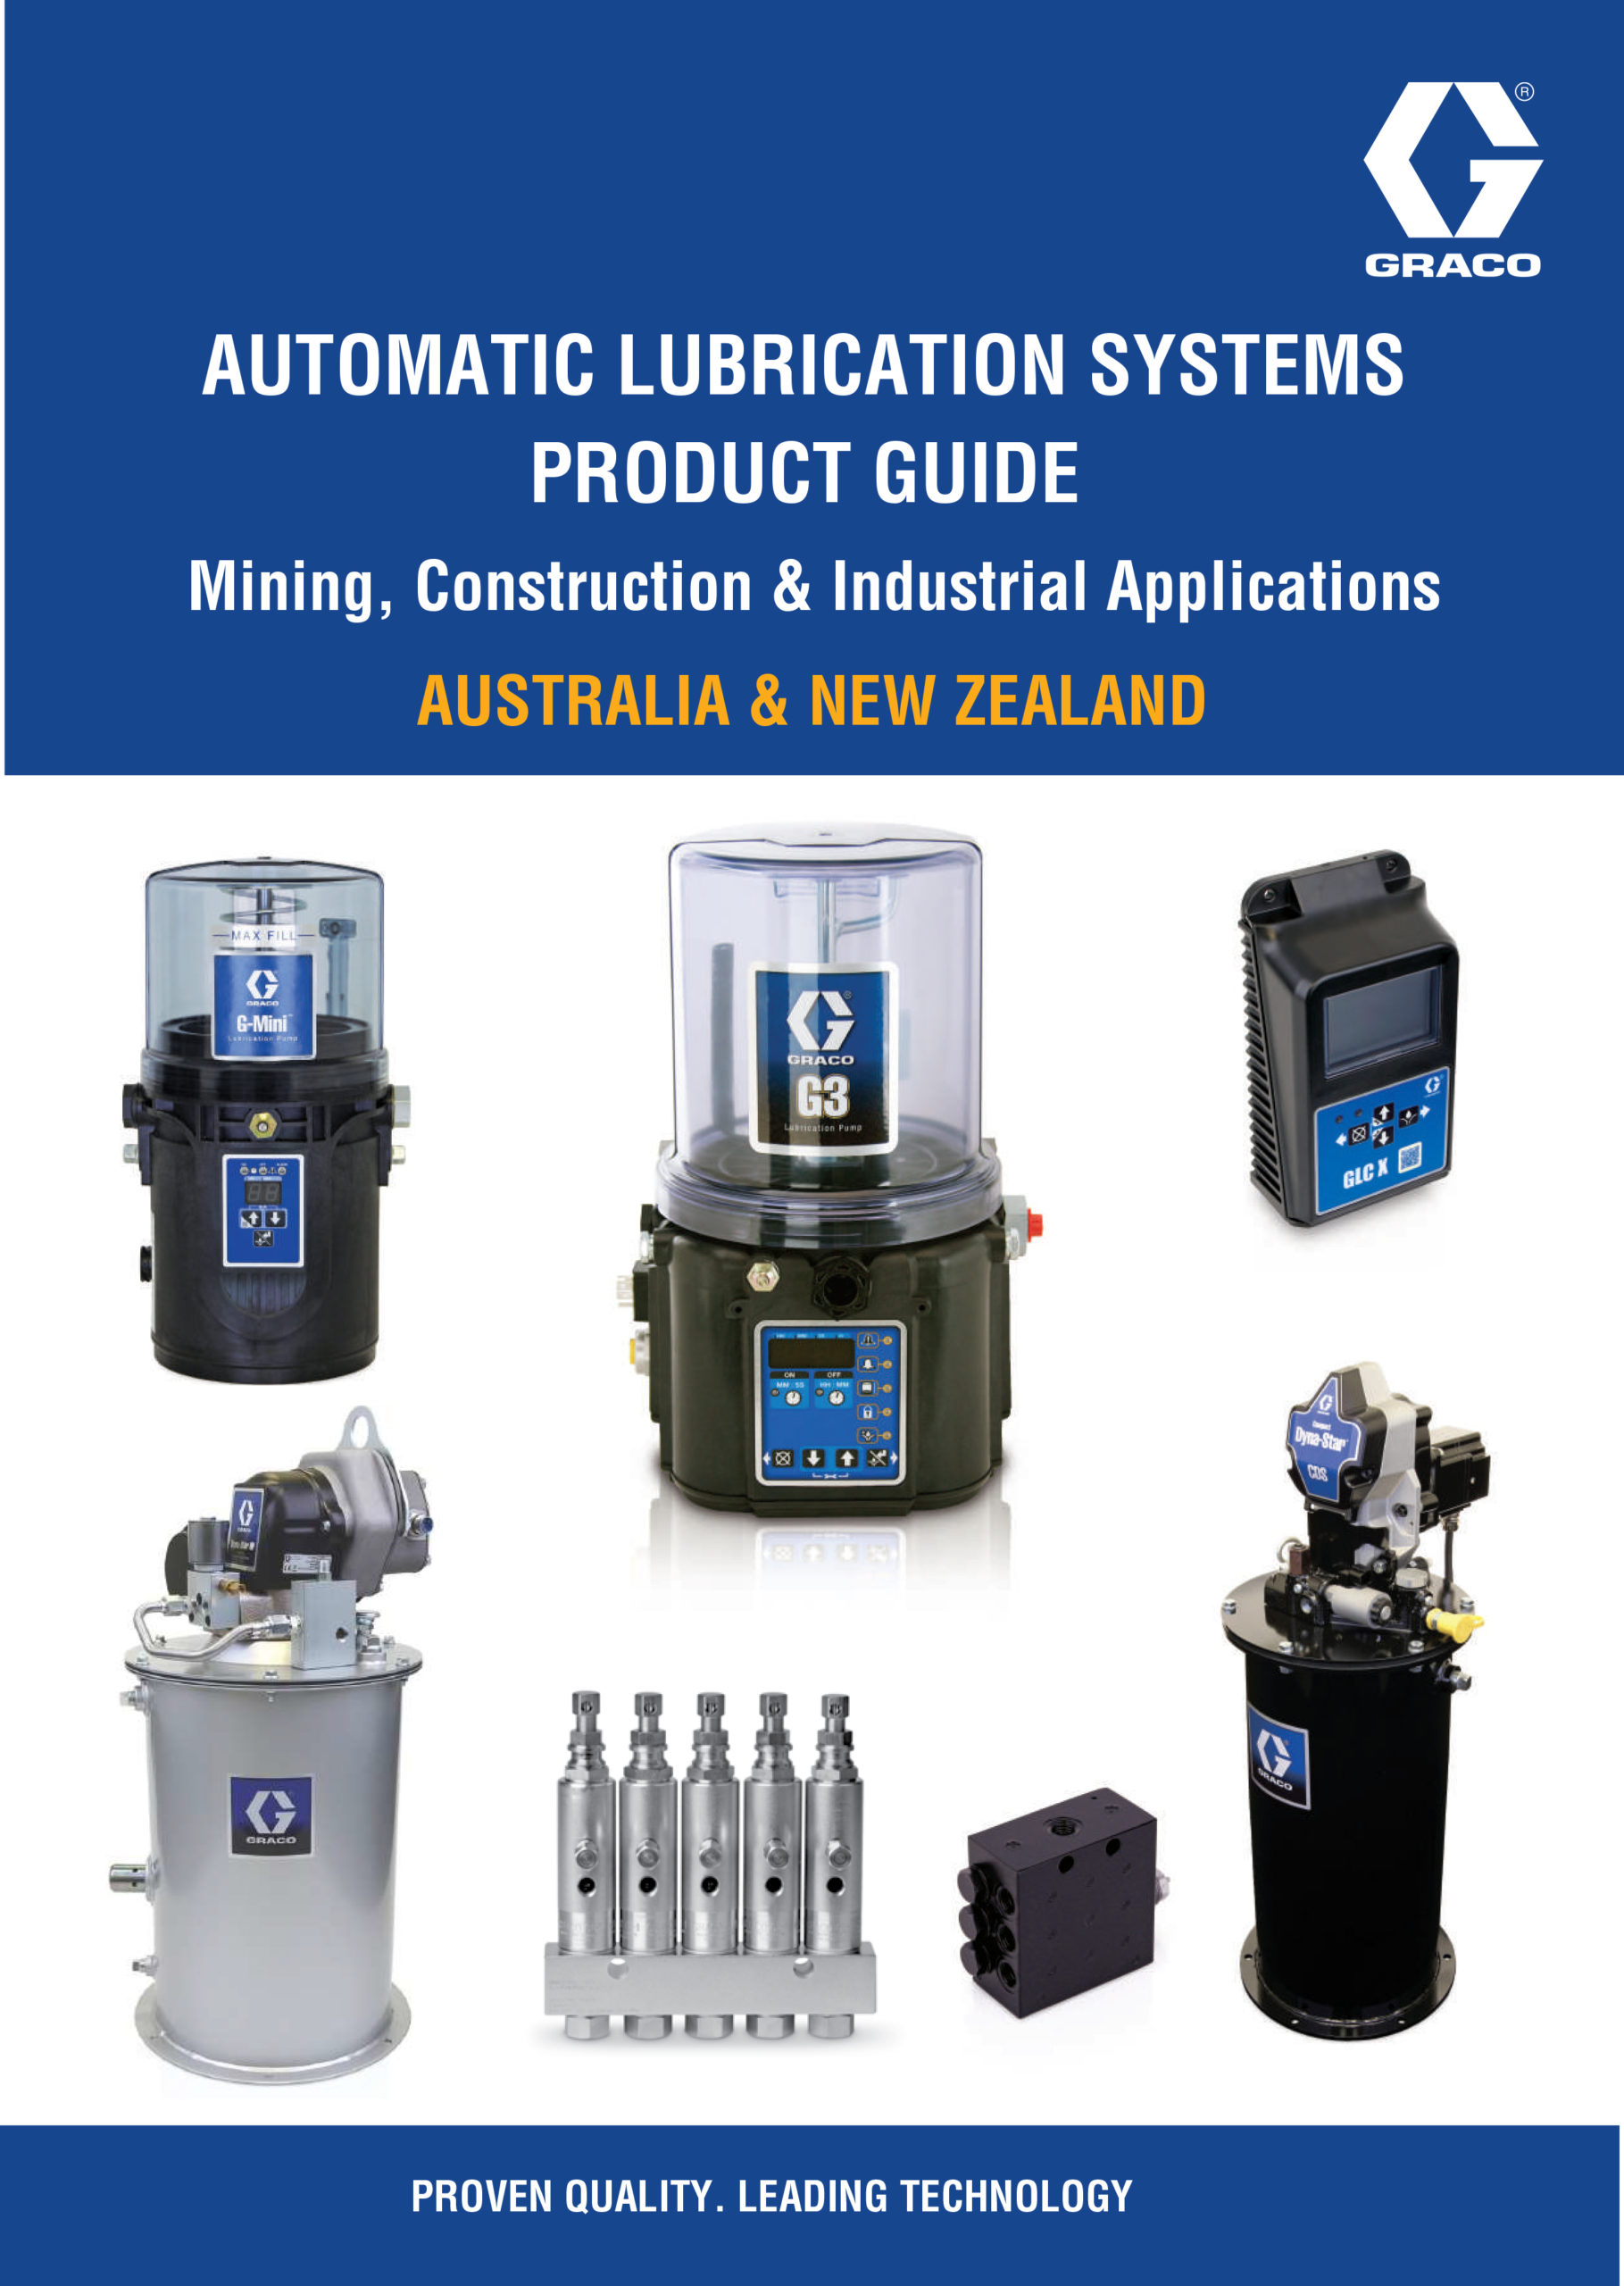 Graco Automatic Lubrication Systems Product Guide